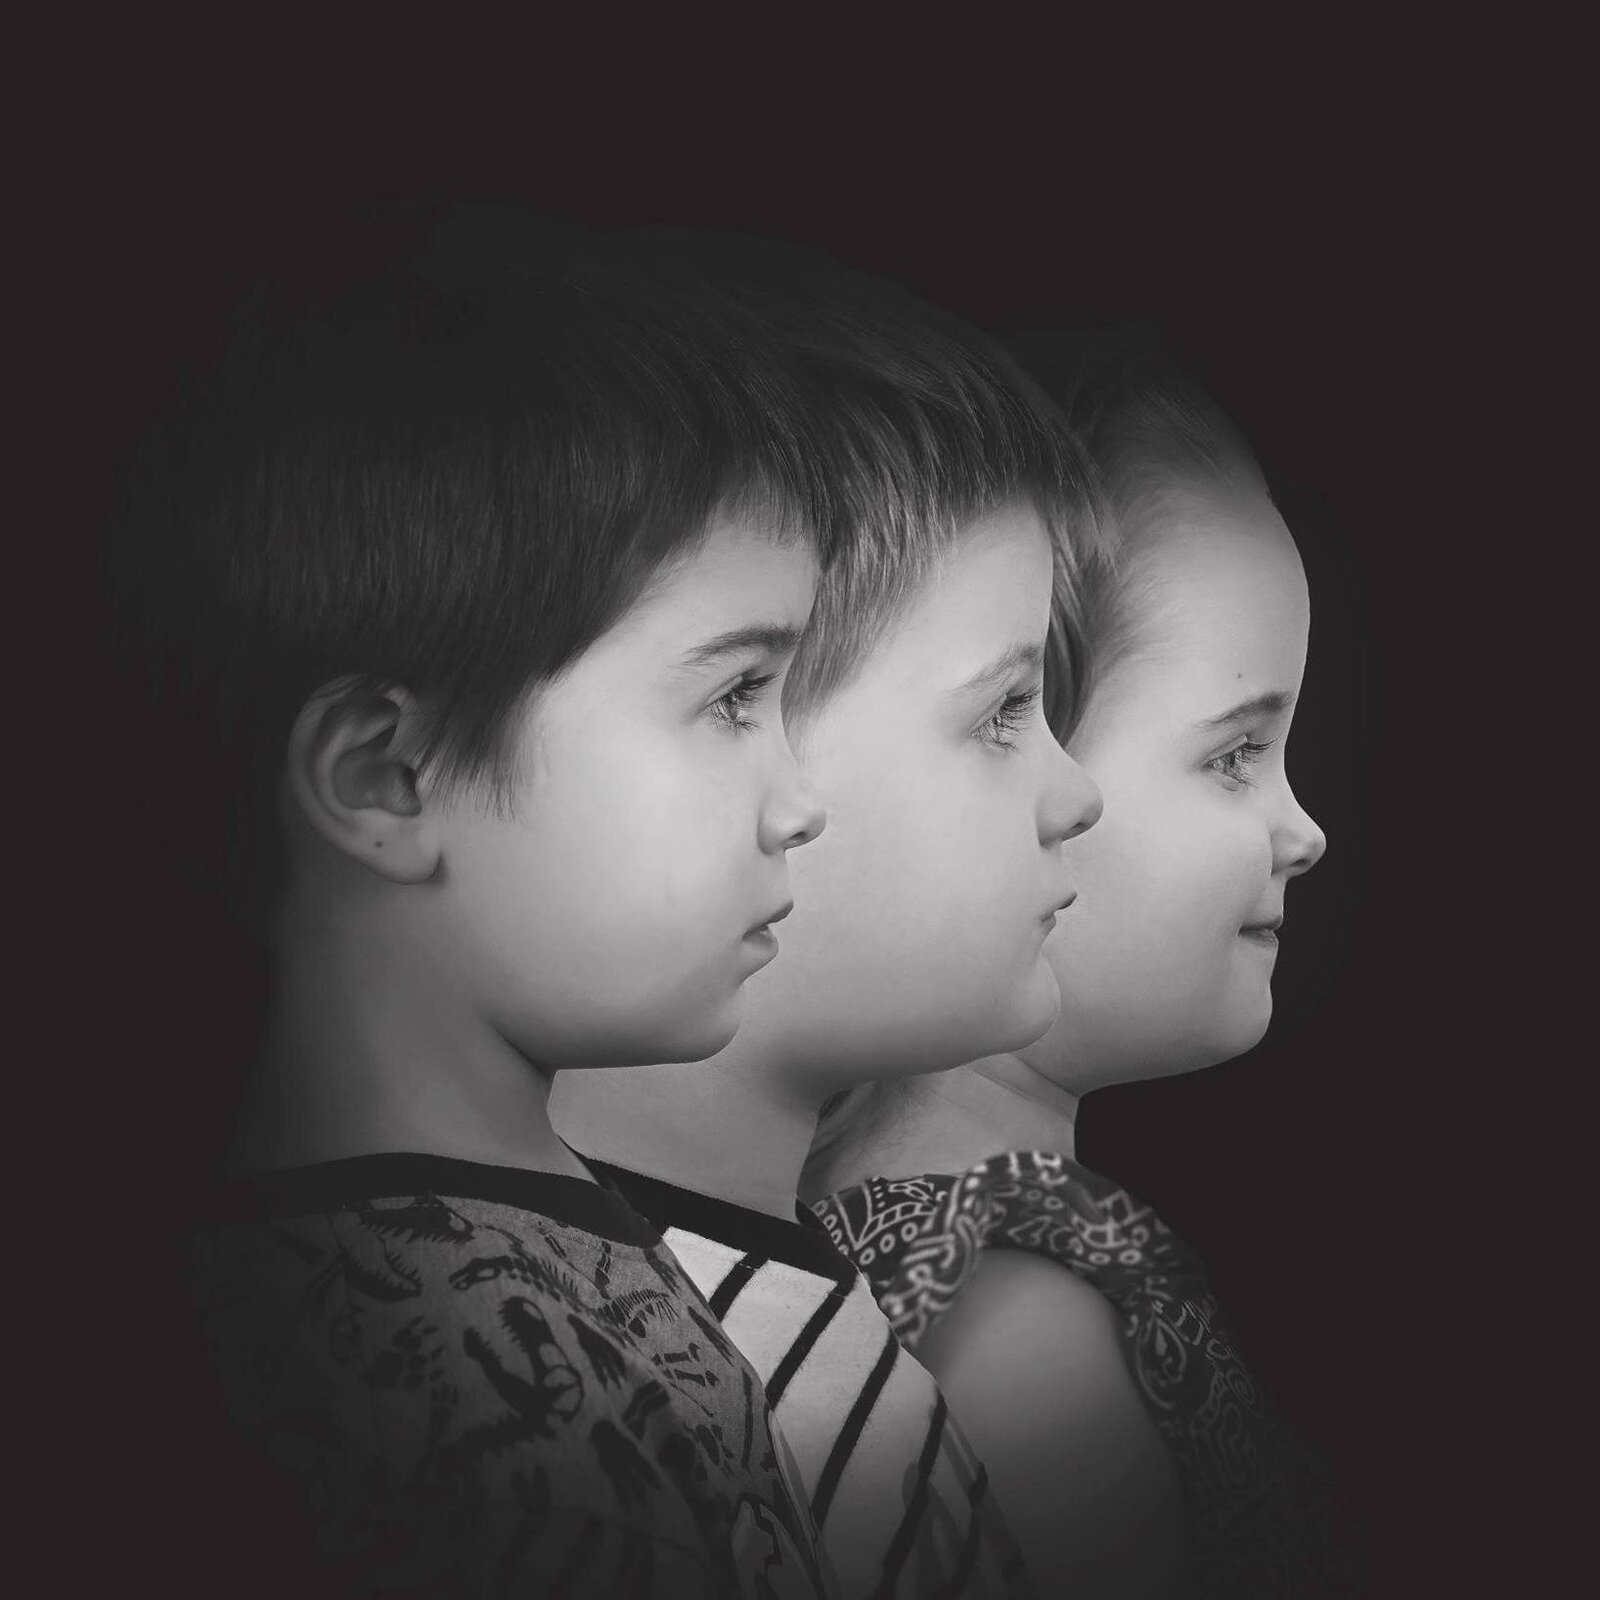 black and white portrait of 3 kids faces side by side generation photo